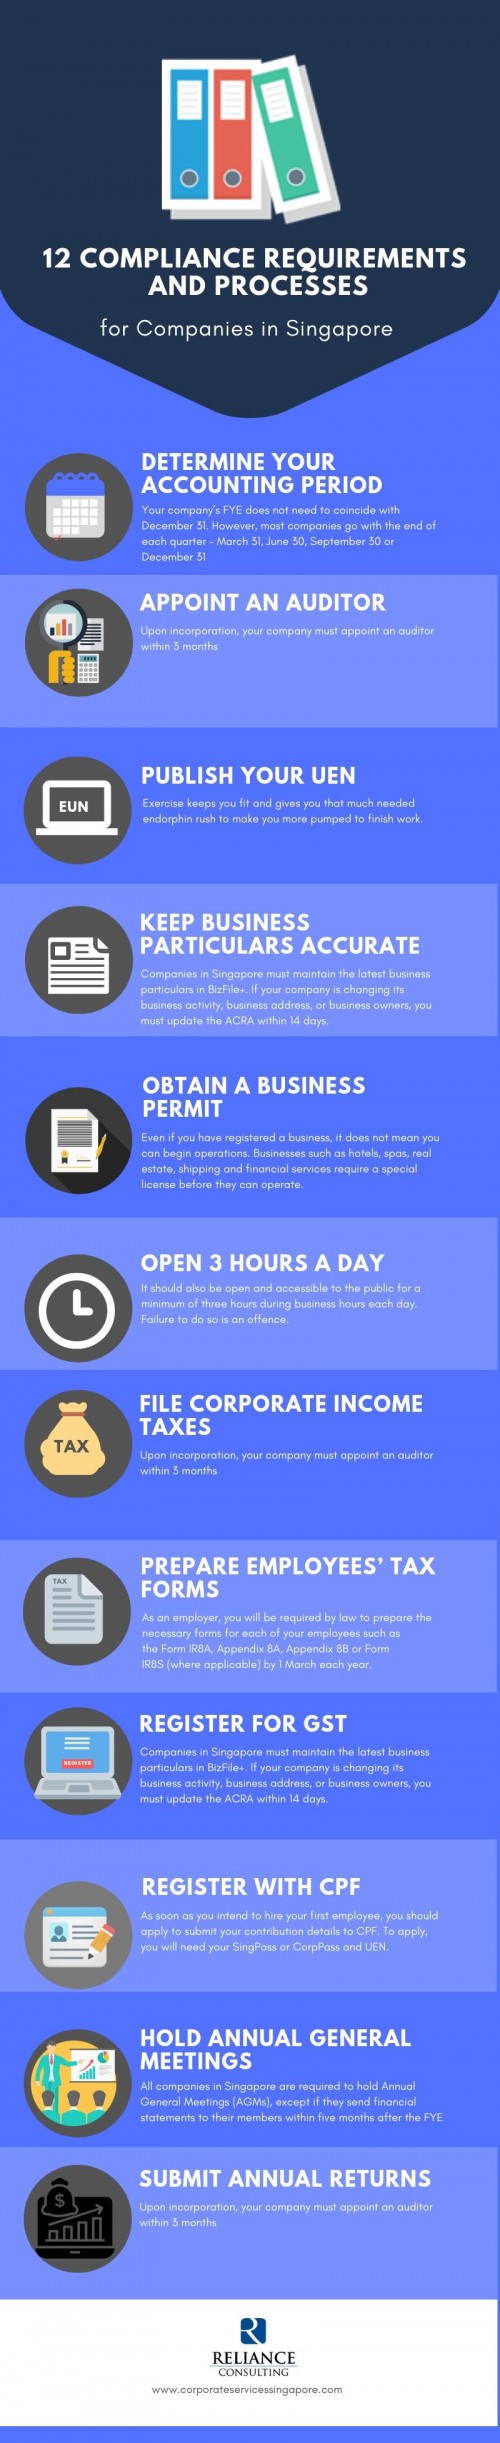 You must comply with the Companies Act and other statutory requirements after company formation in Singapore to avoid penalties or legal consequences and guarantee that you have decent corporate governance for your company.

Take a look at this guide to the financial reporting and tax compliance requirements for companies in Singapore

Source: https://bit.ly/2WG1XTJ